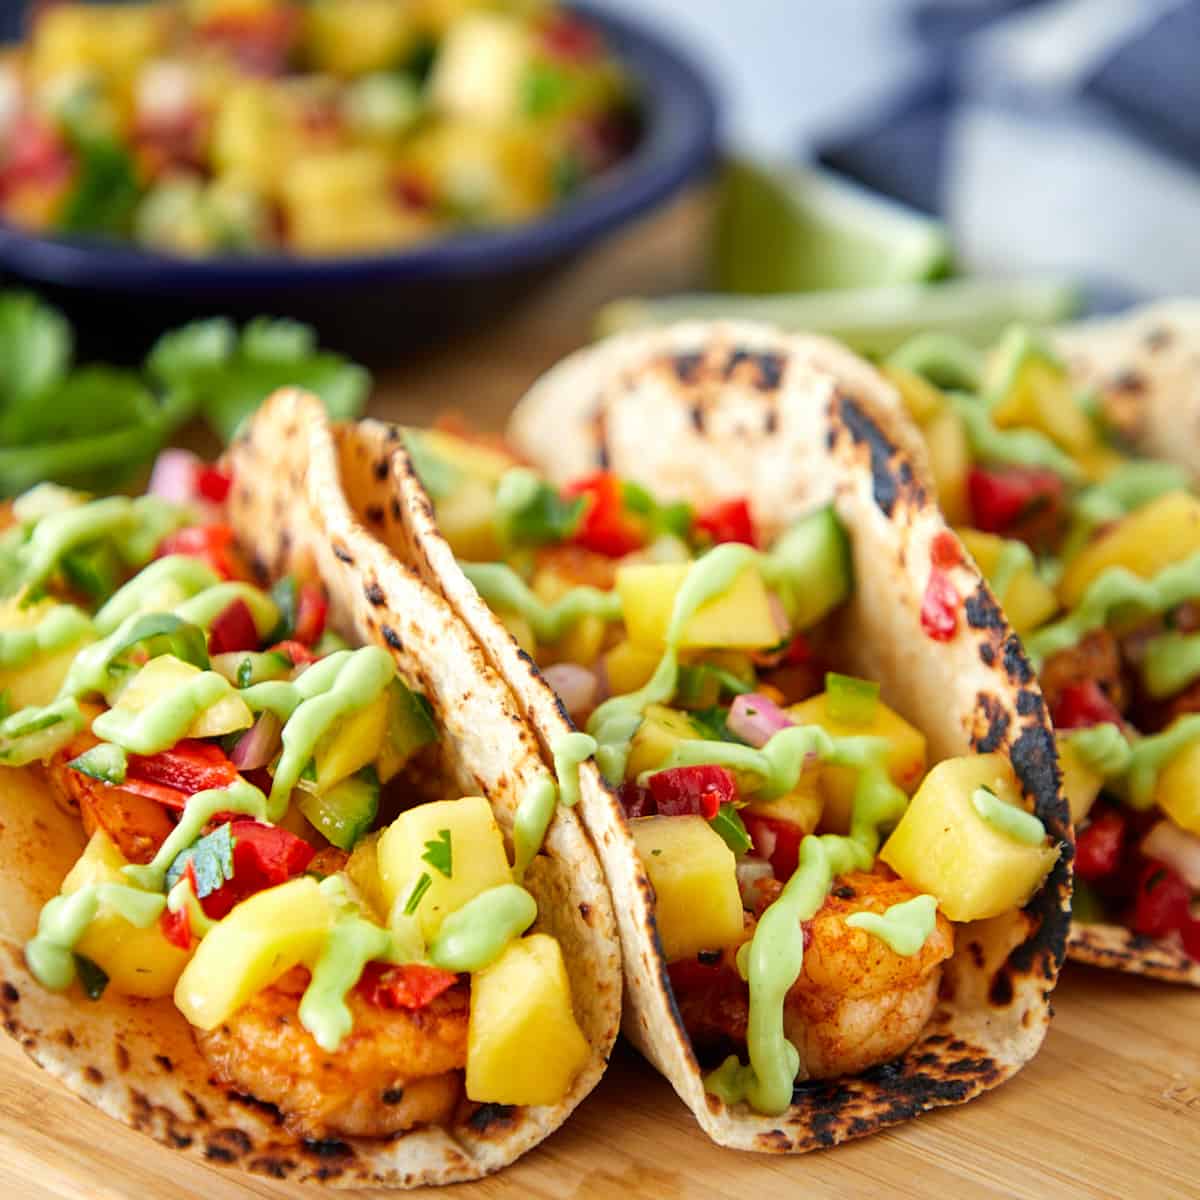 Shrimp tacos with mango salsa on a wooden cutting board.